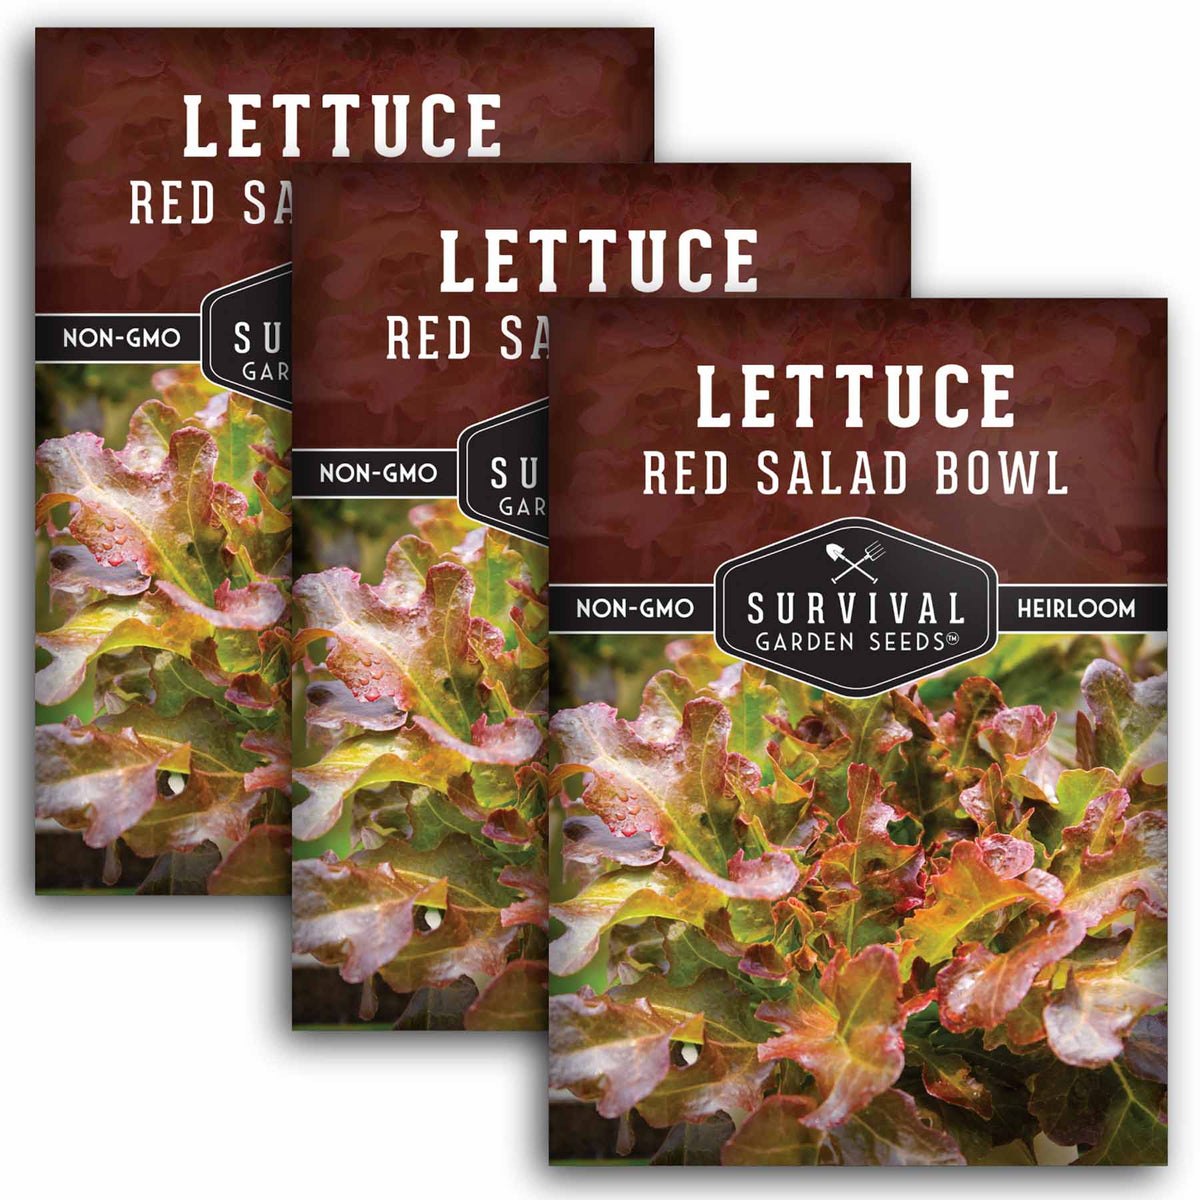 3 packets of Red Salad Bowl lettuce seeds